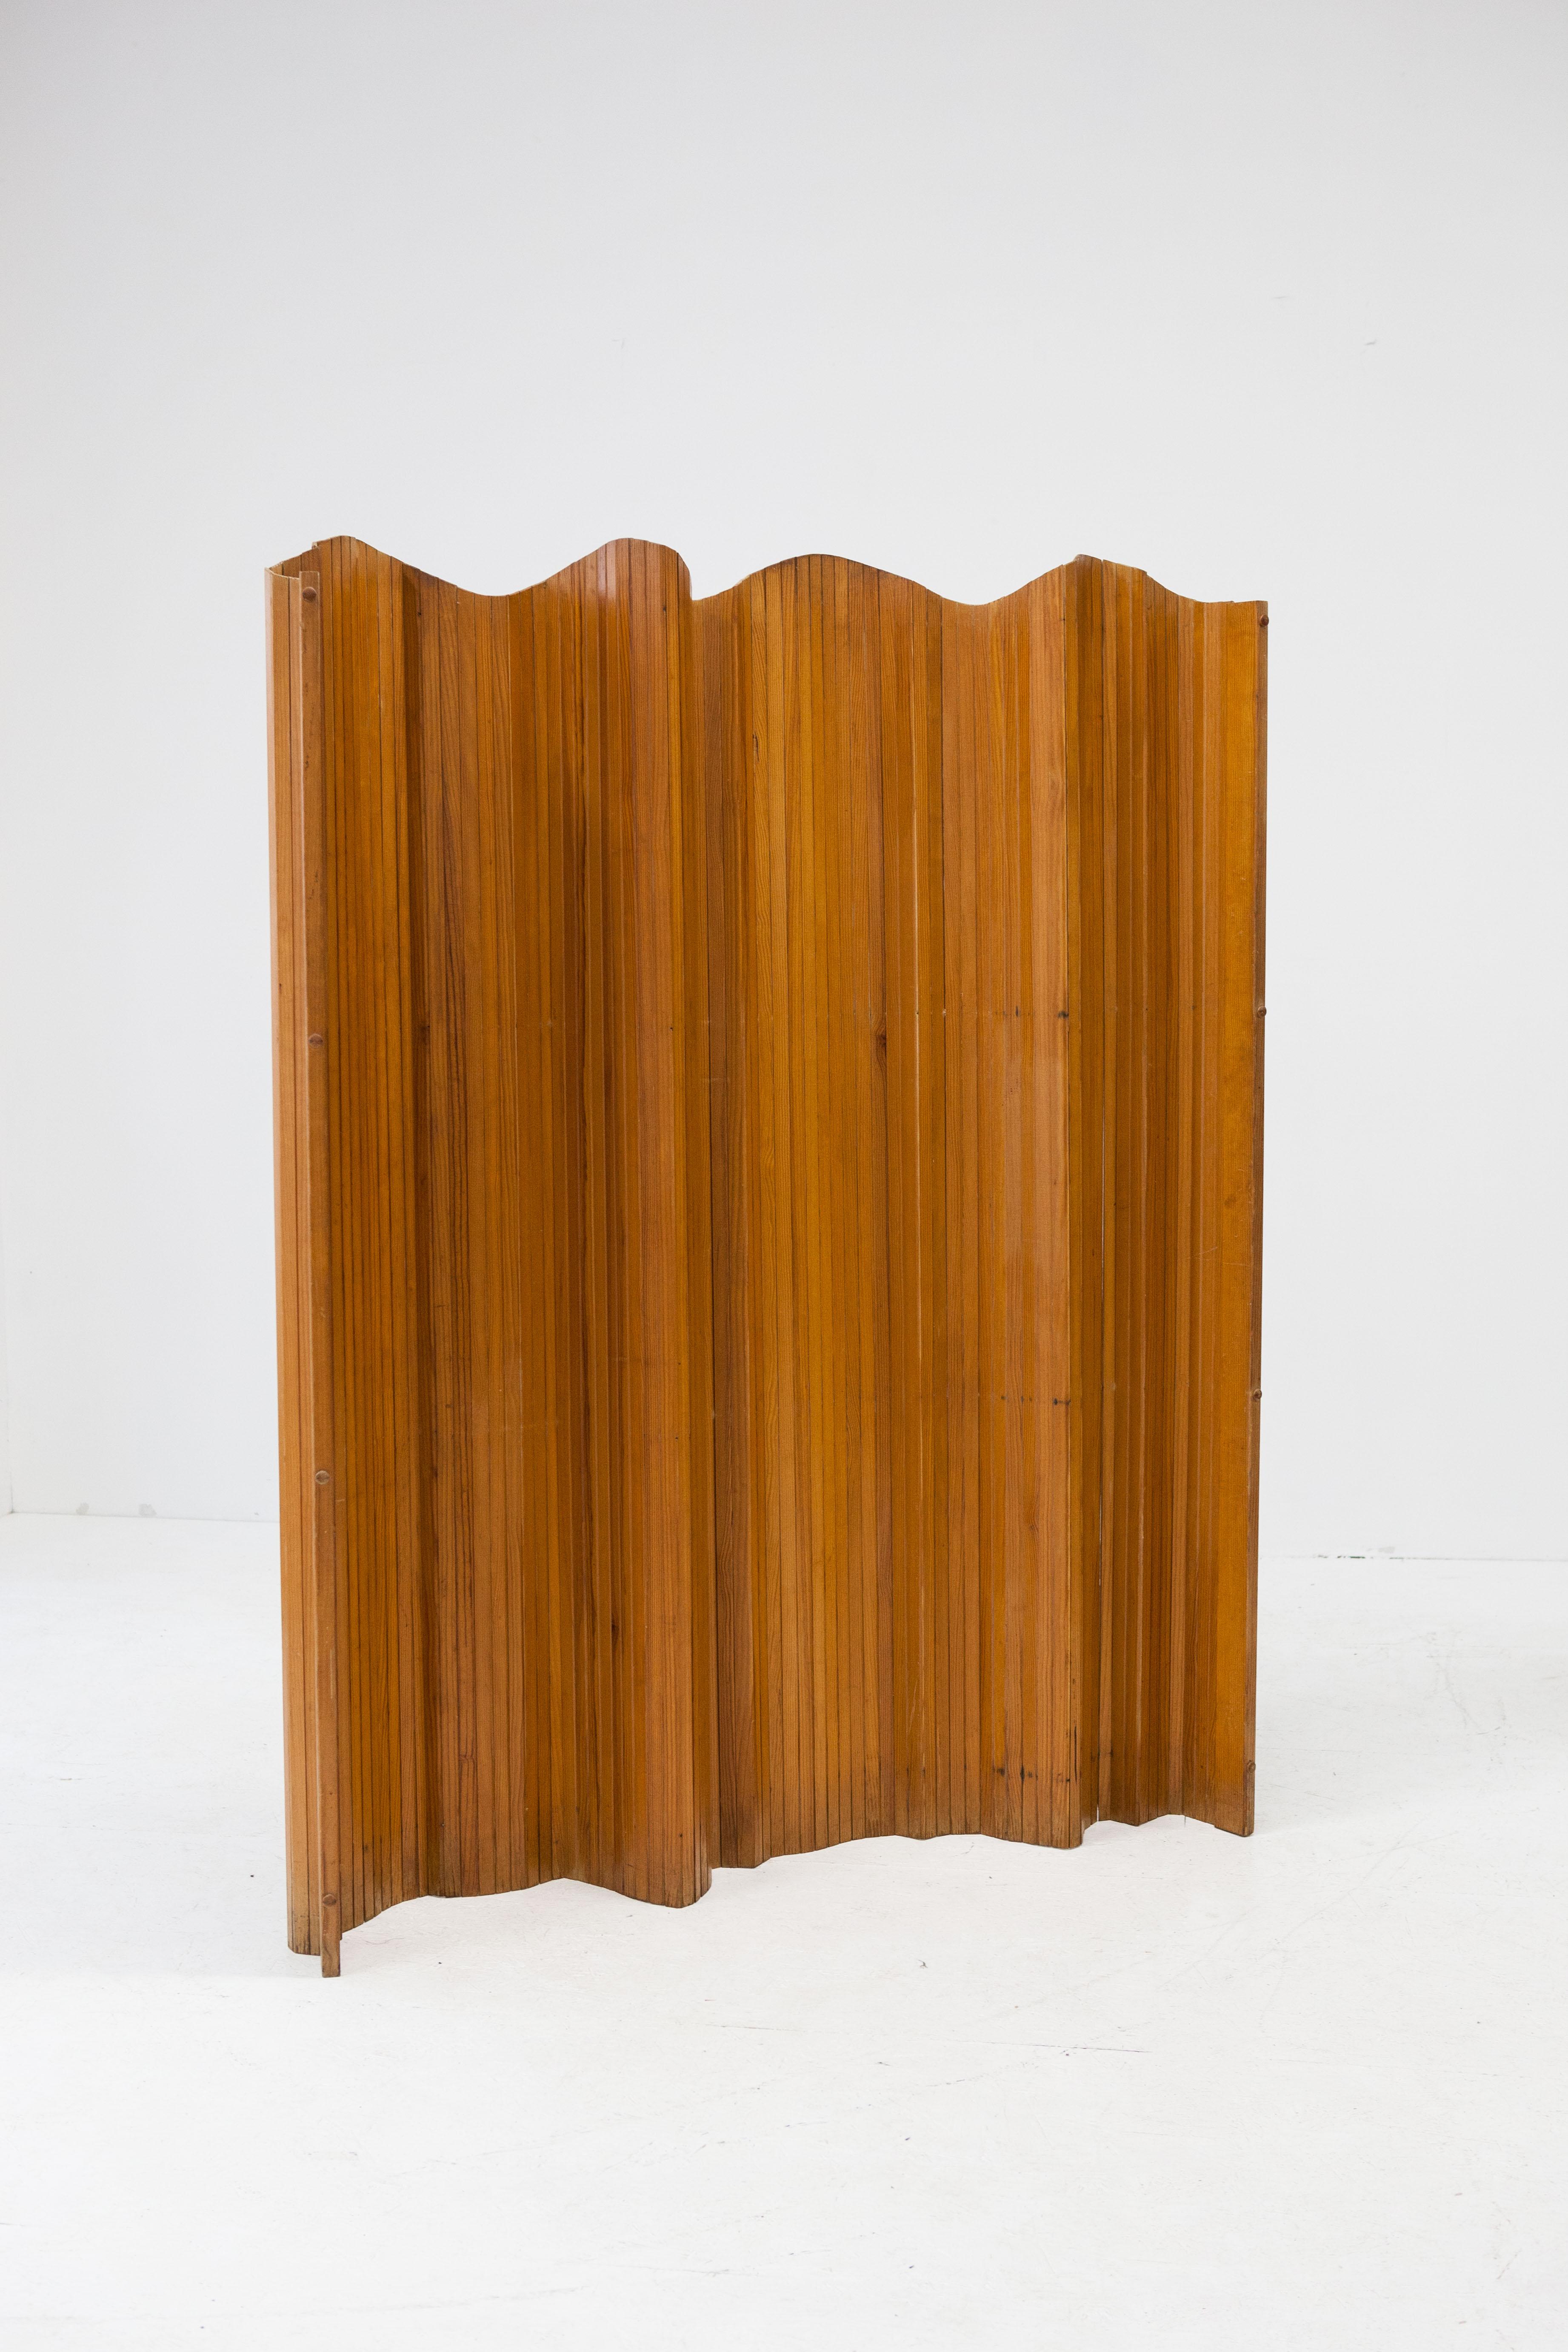 Mid-Century Modern French wooden room divider, Tambour Screen by Jomain Baumann, 1950s For Sale